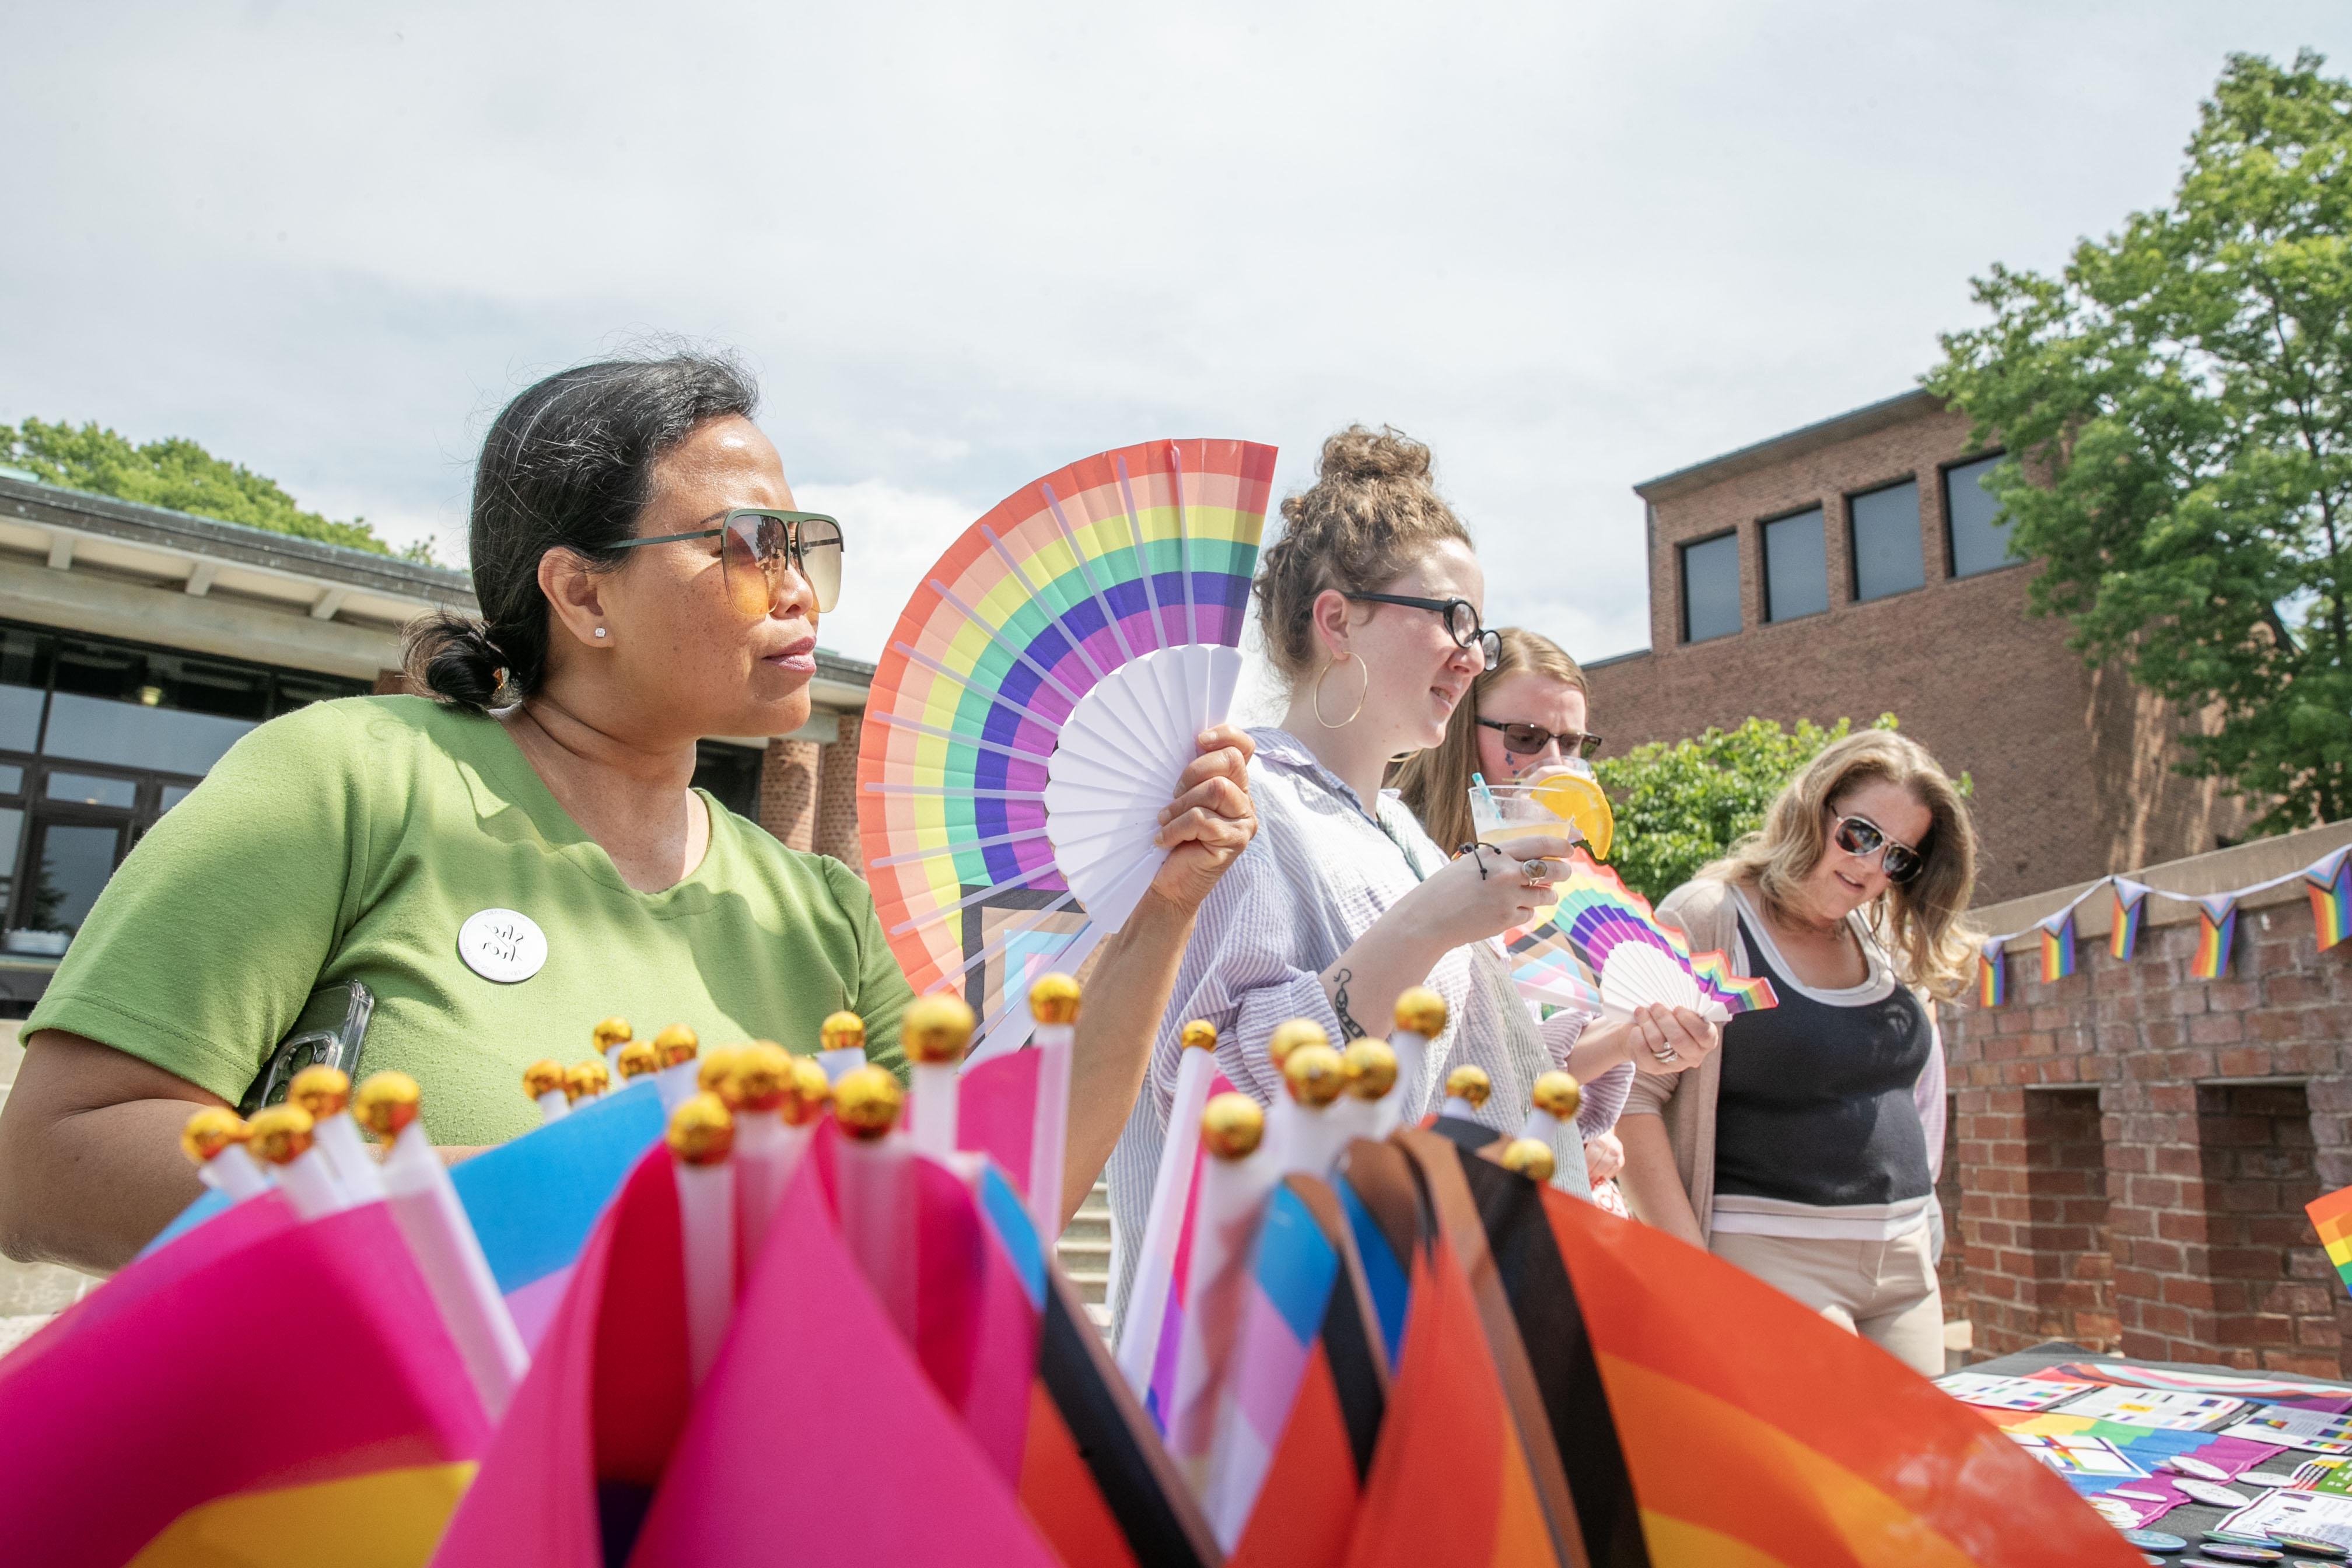 Attendees using Pride-themed fans to keep cool